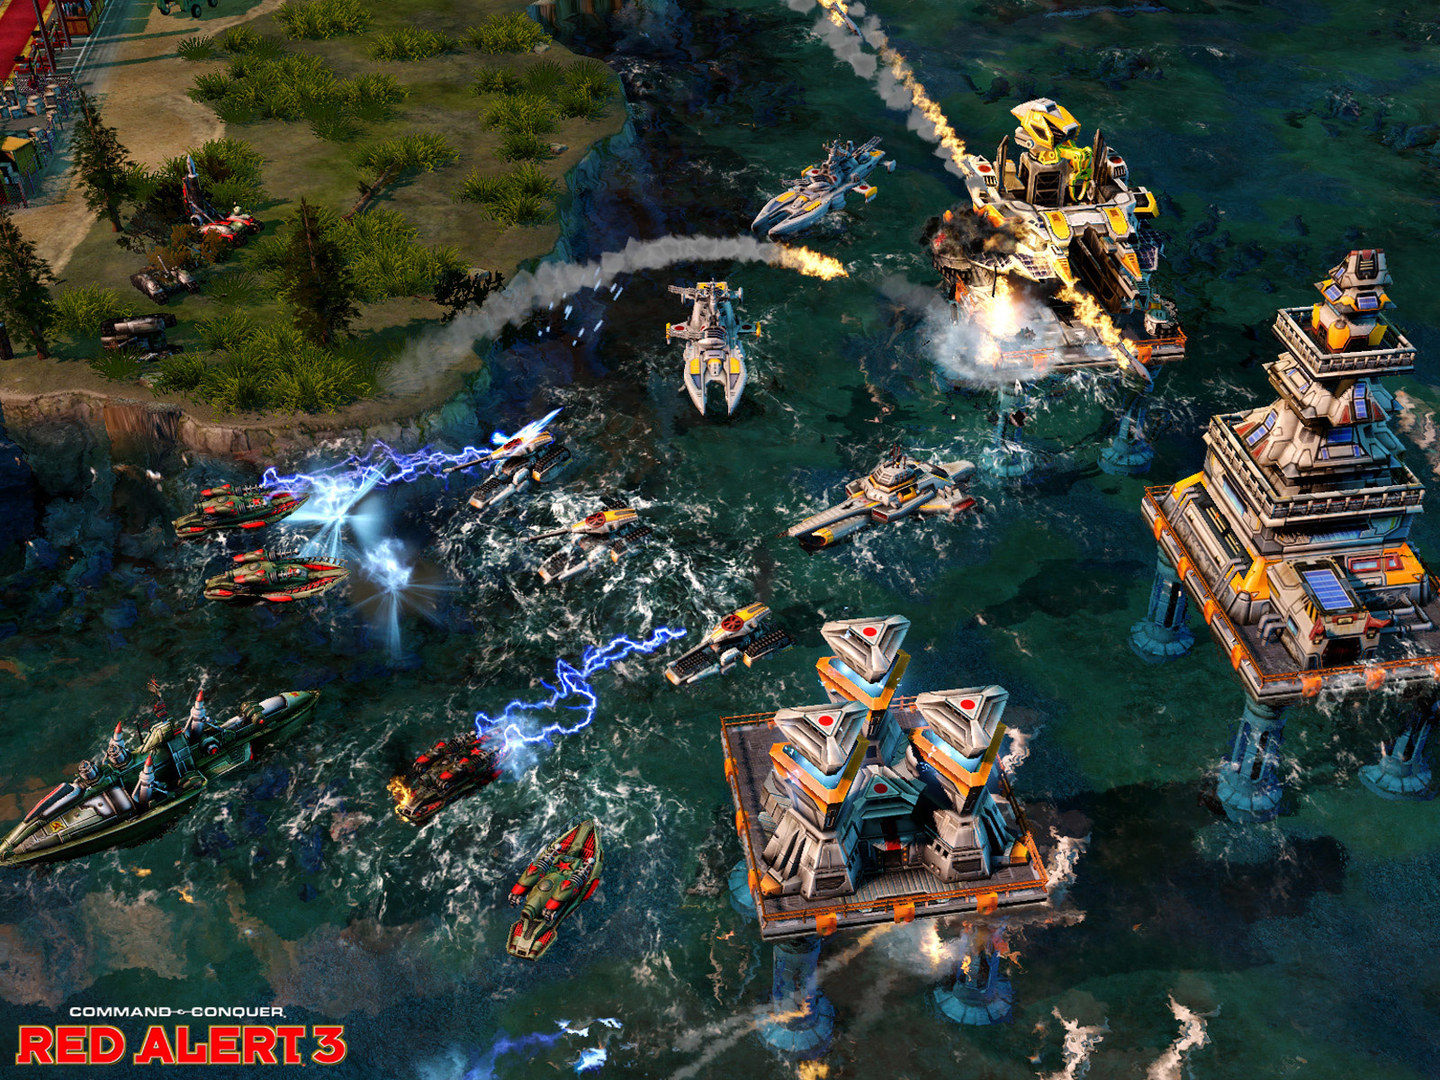 Find the best laptops for Command & Conquer Red Alert 3